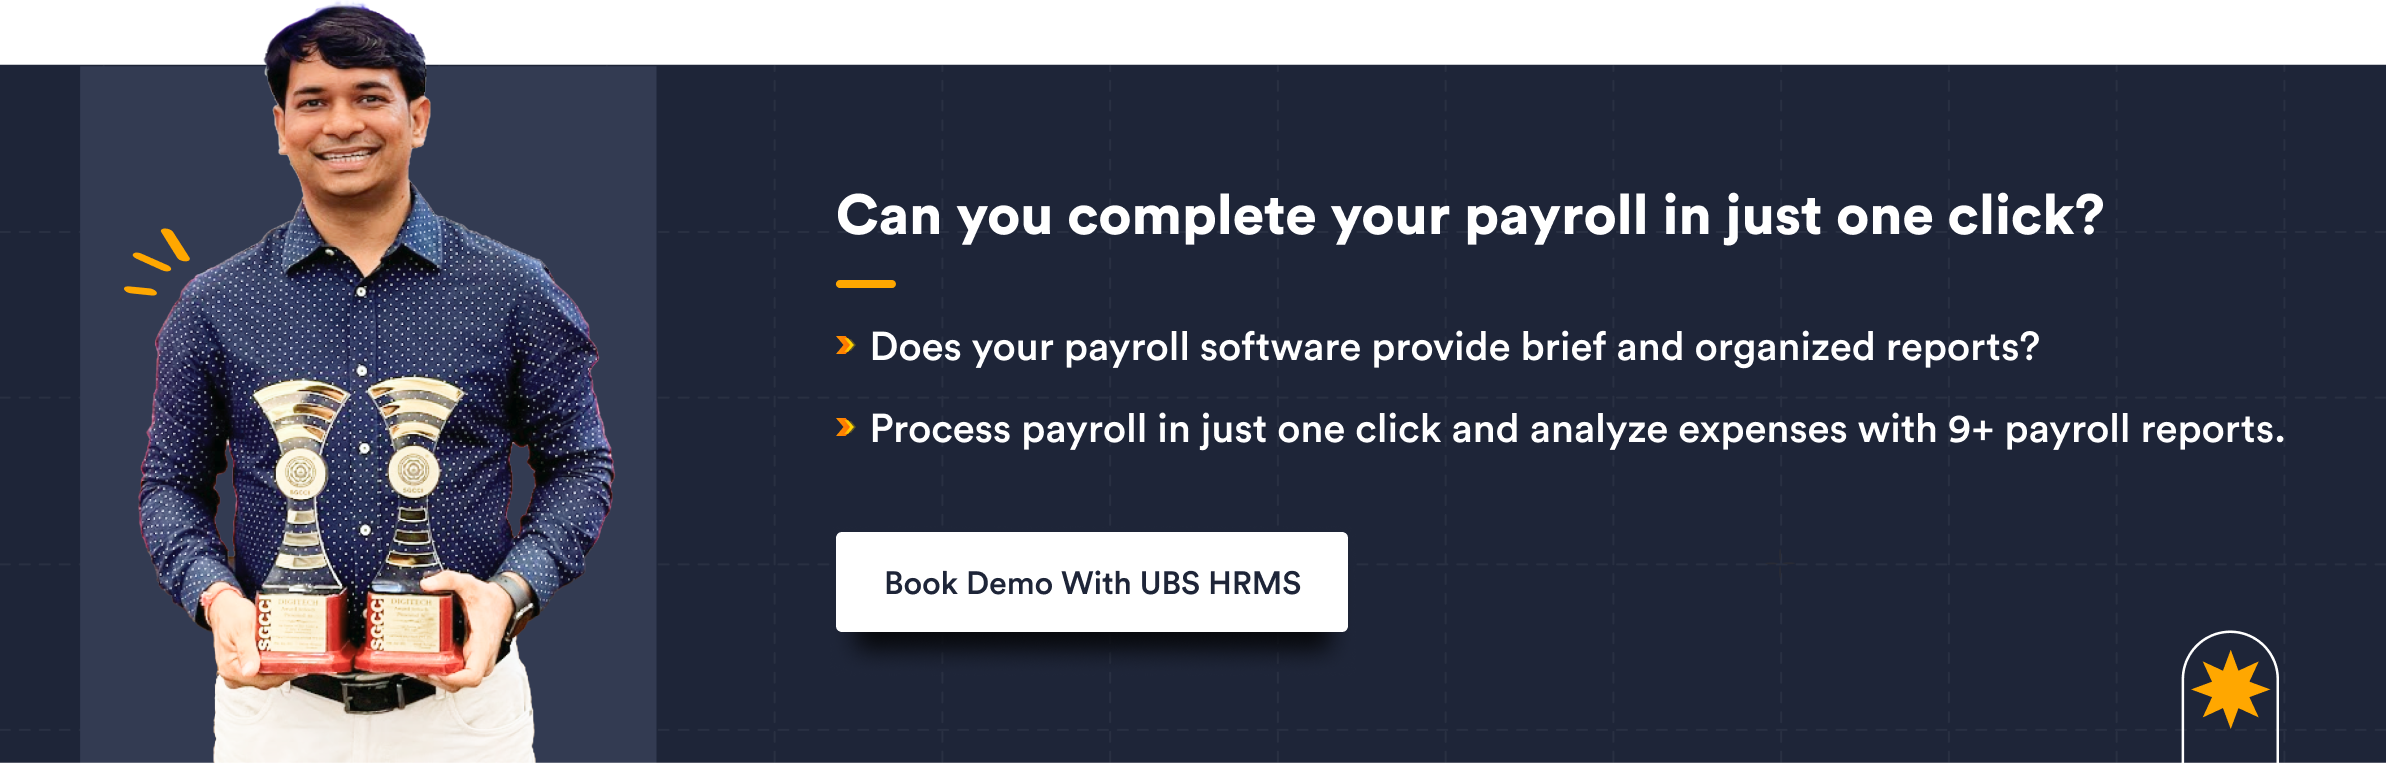 Can you complete your payroll in just one click